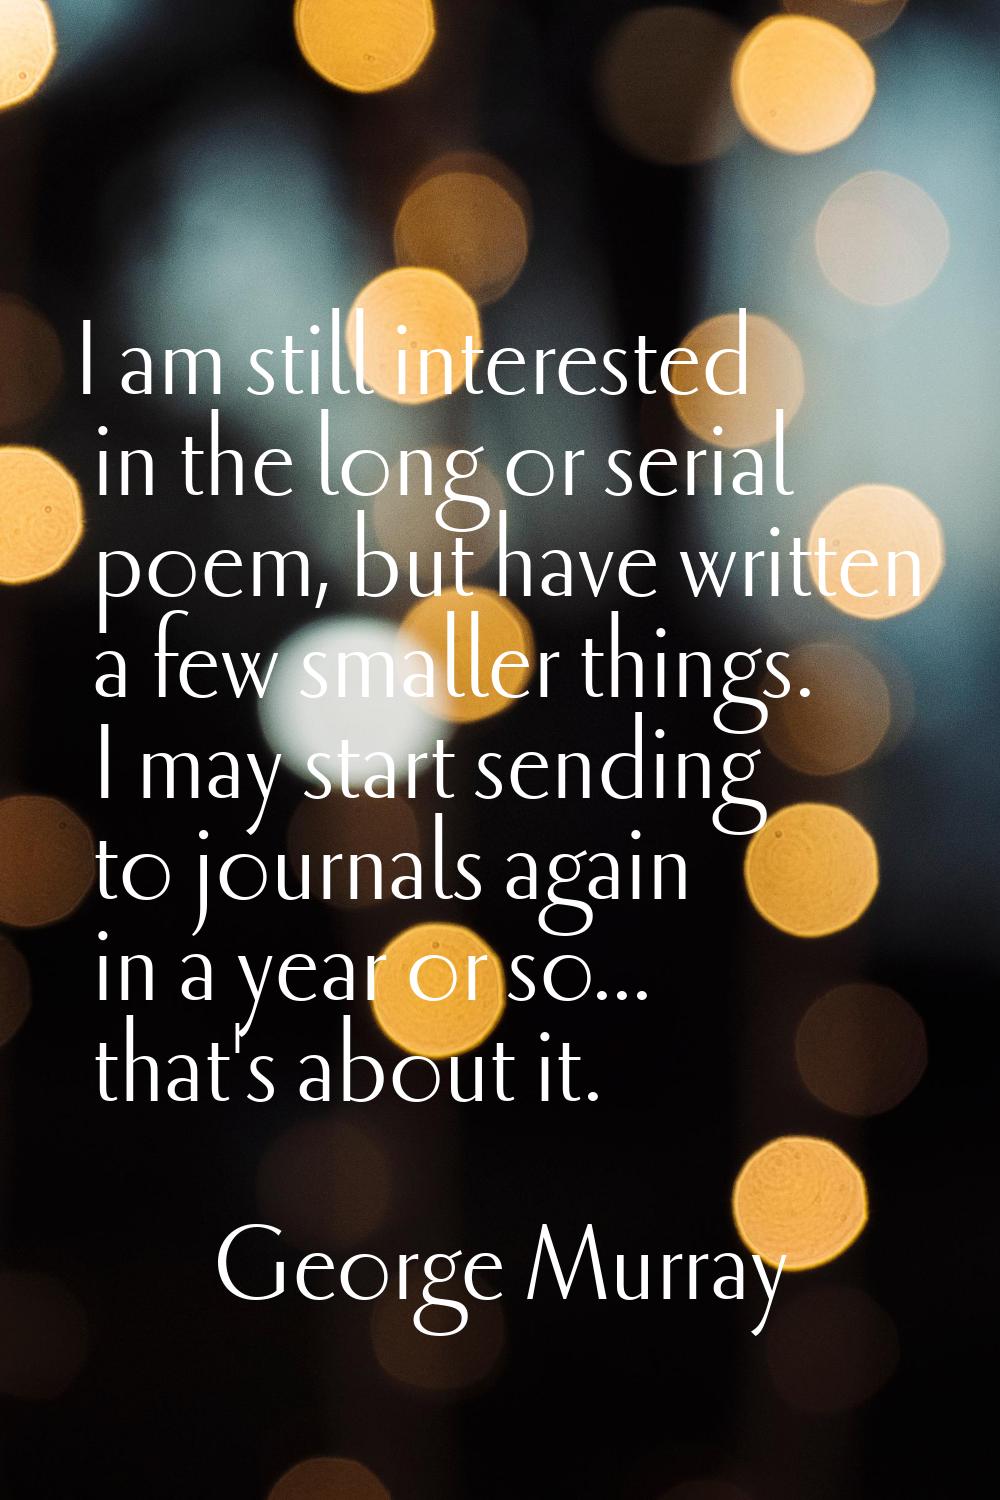 I am still interested in the long or serial poem, but have written a few smaller things. I may star